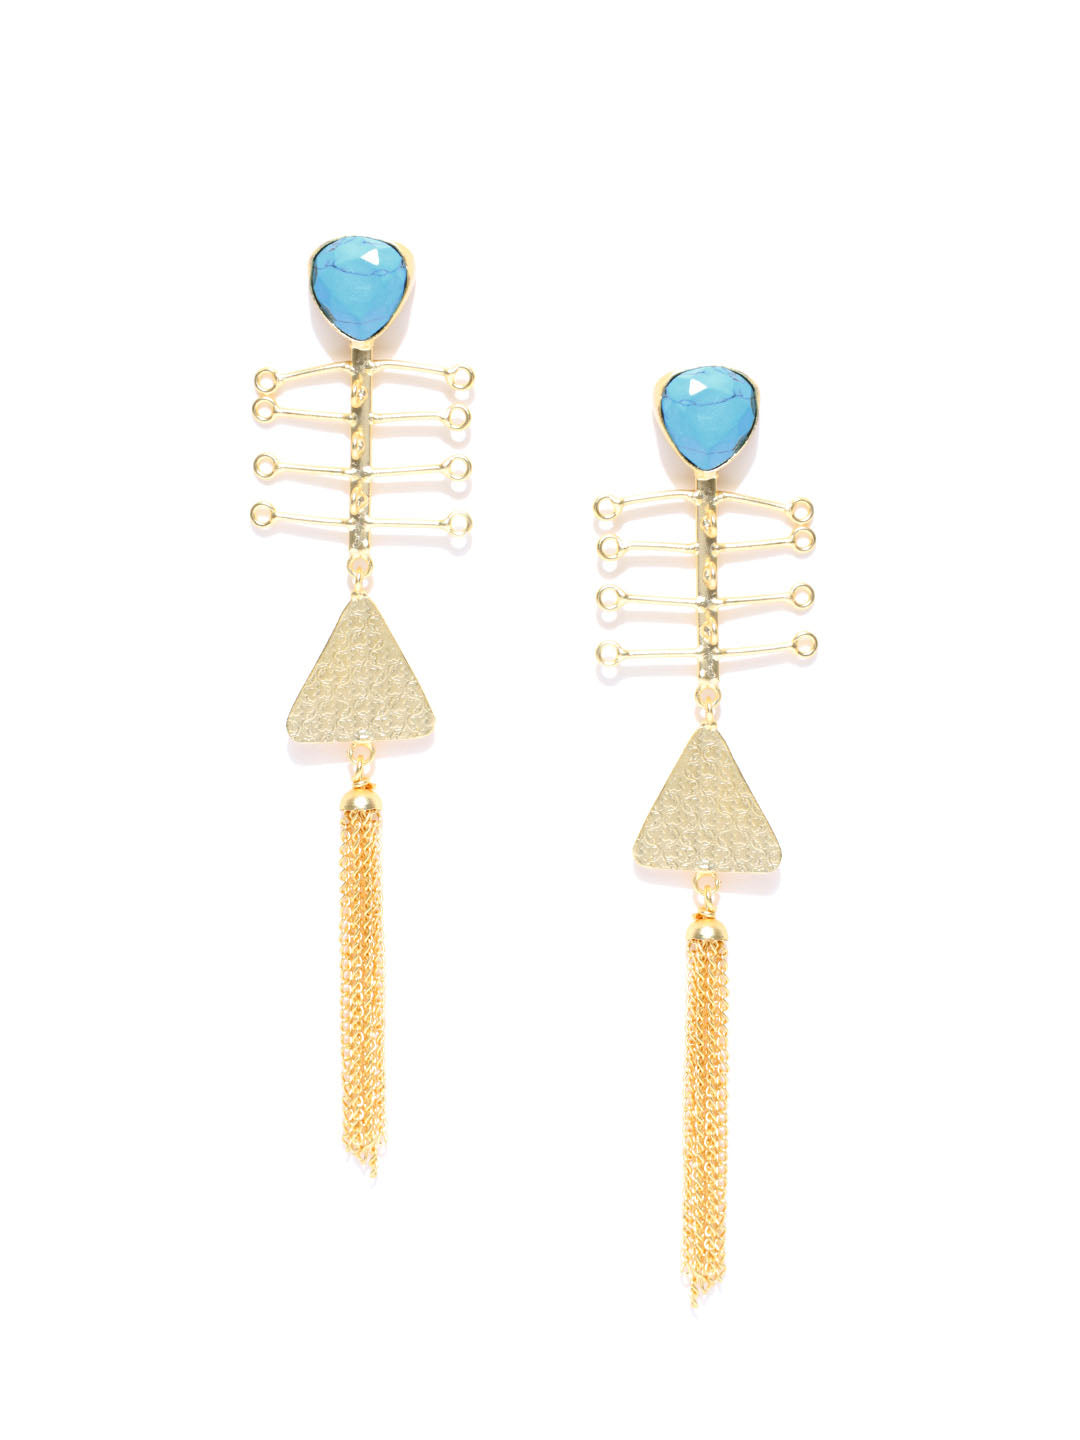 Limited Editon Elegant Triangle Design Magnificent Pair Of Colorful Turquoise Blue Tassel Earrings